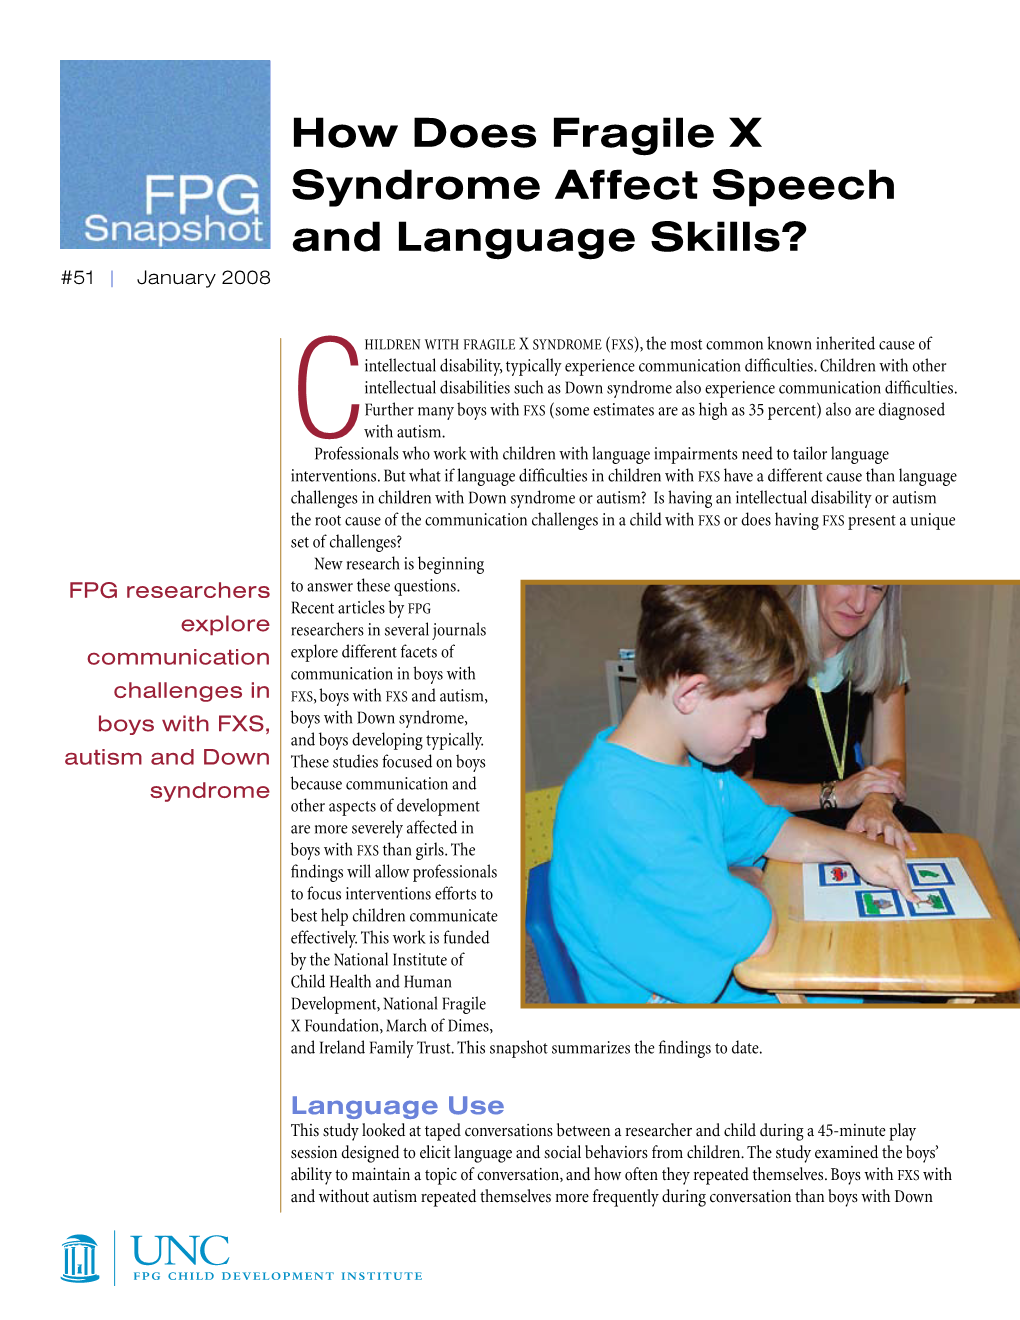 How Does Fragile X Syndrome Affect Speech and Language Skills? #51 | January 2008